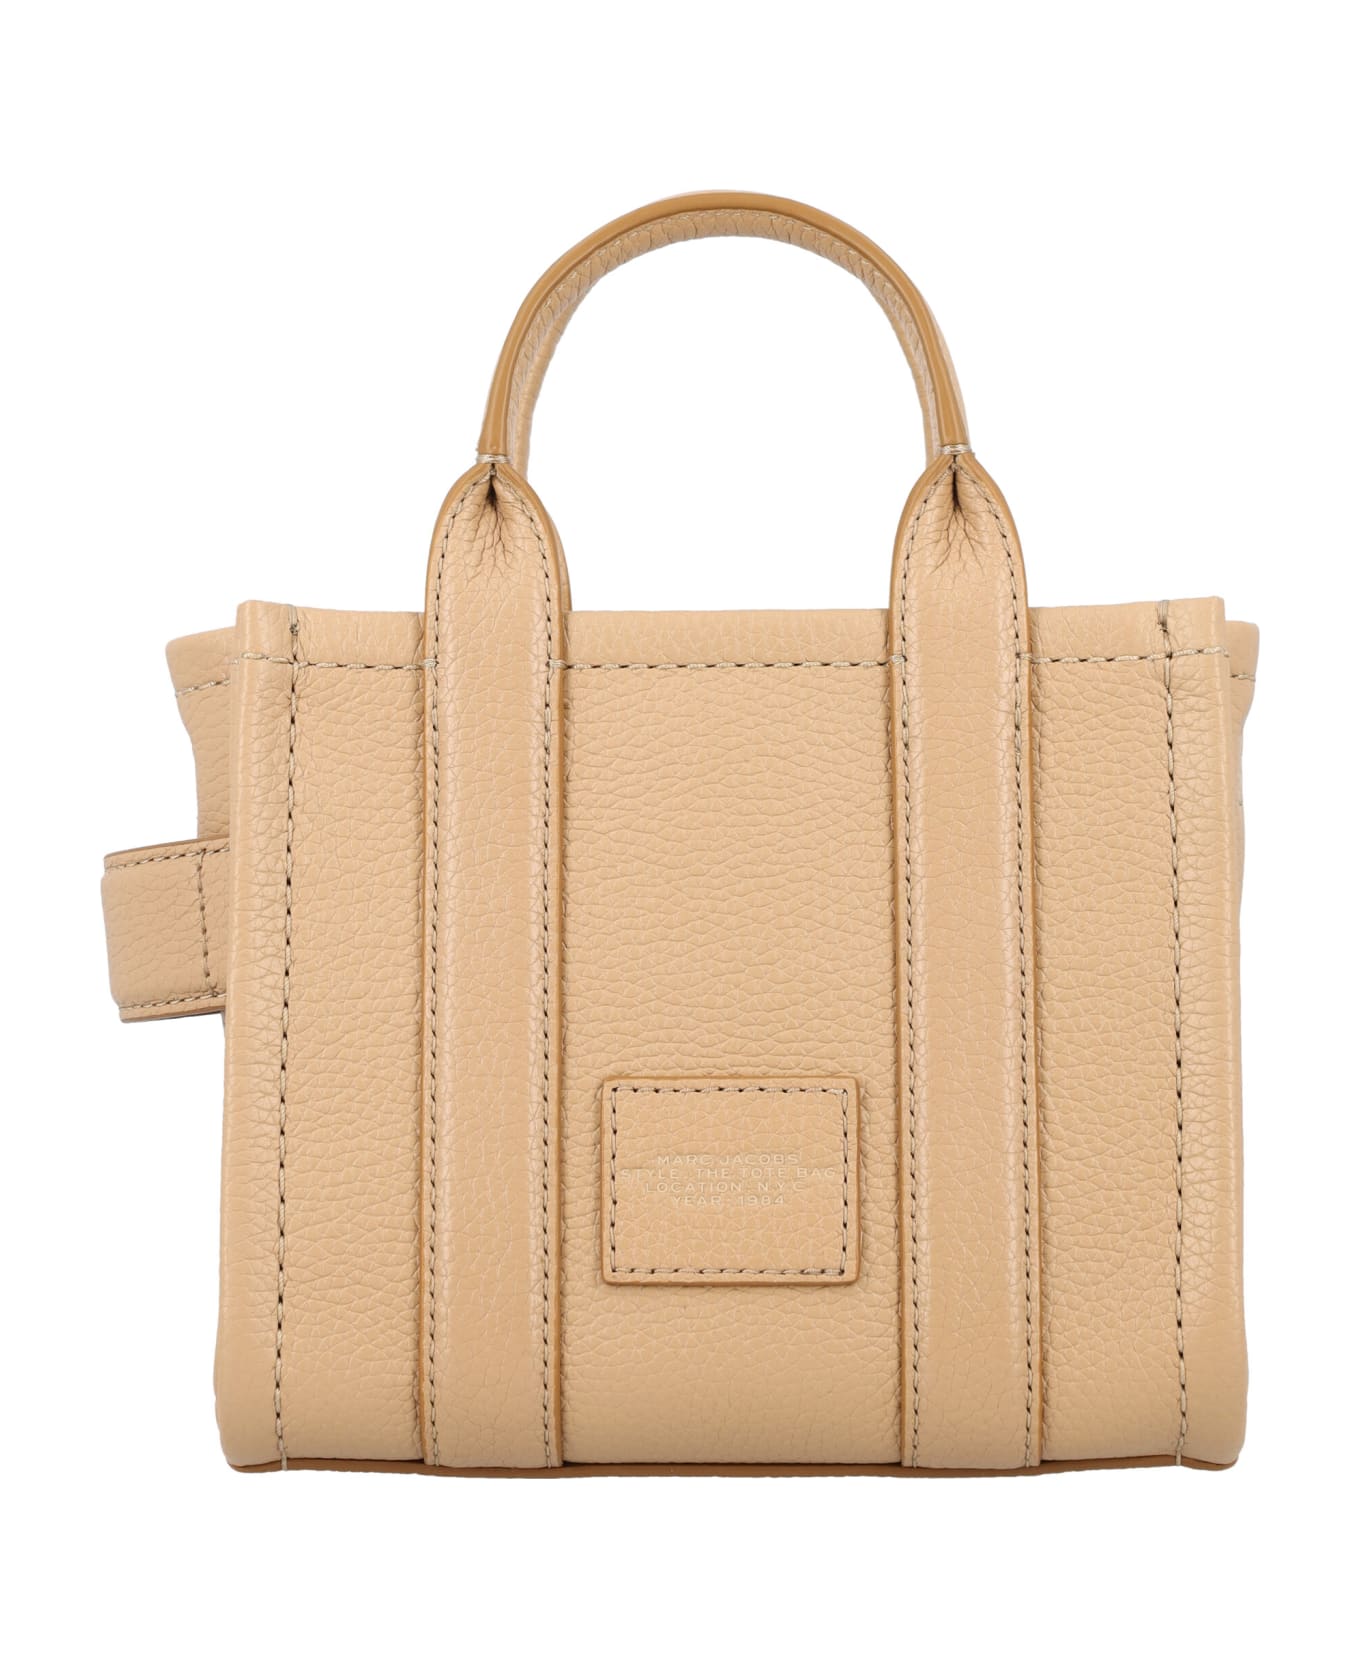 Marc Jacobs The Mini Tote Leather Bag - CAMEL トートバッグ